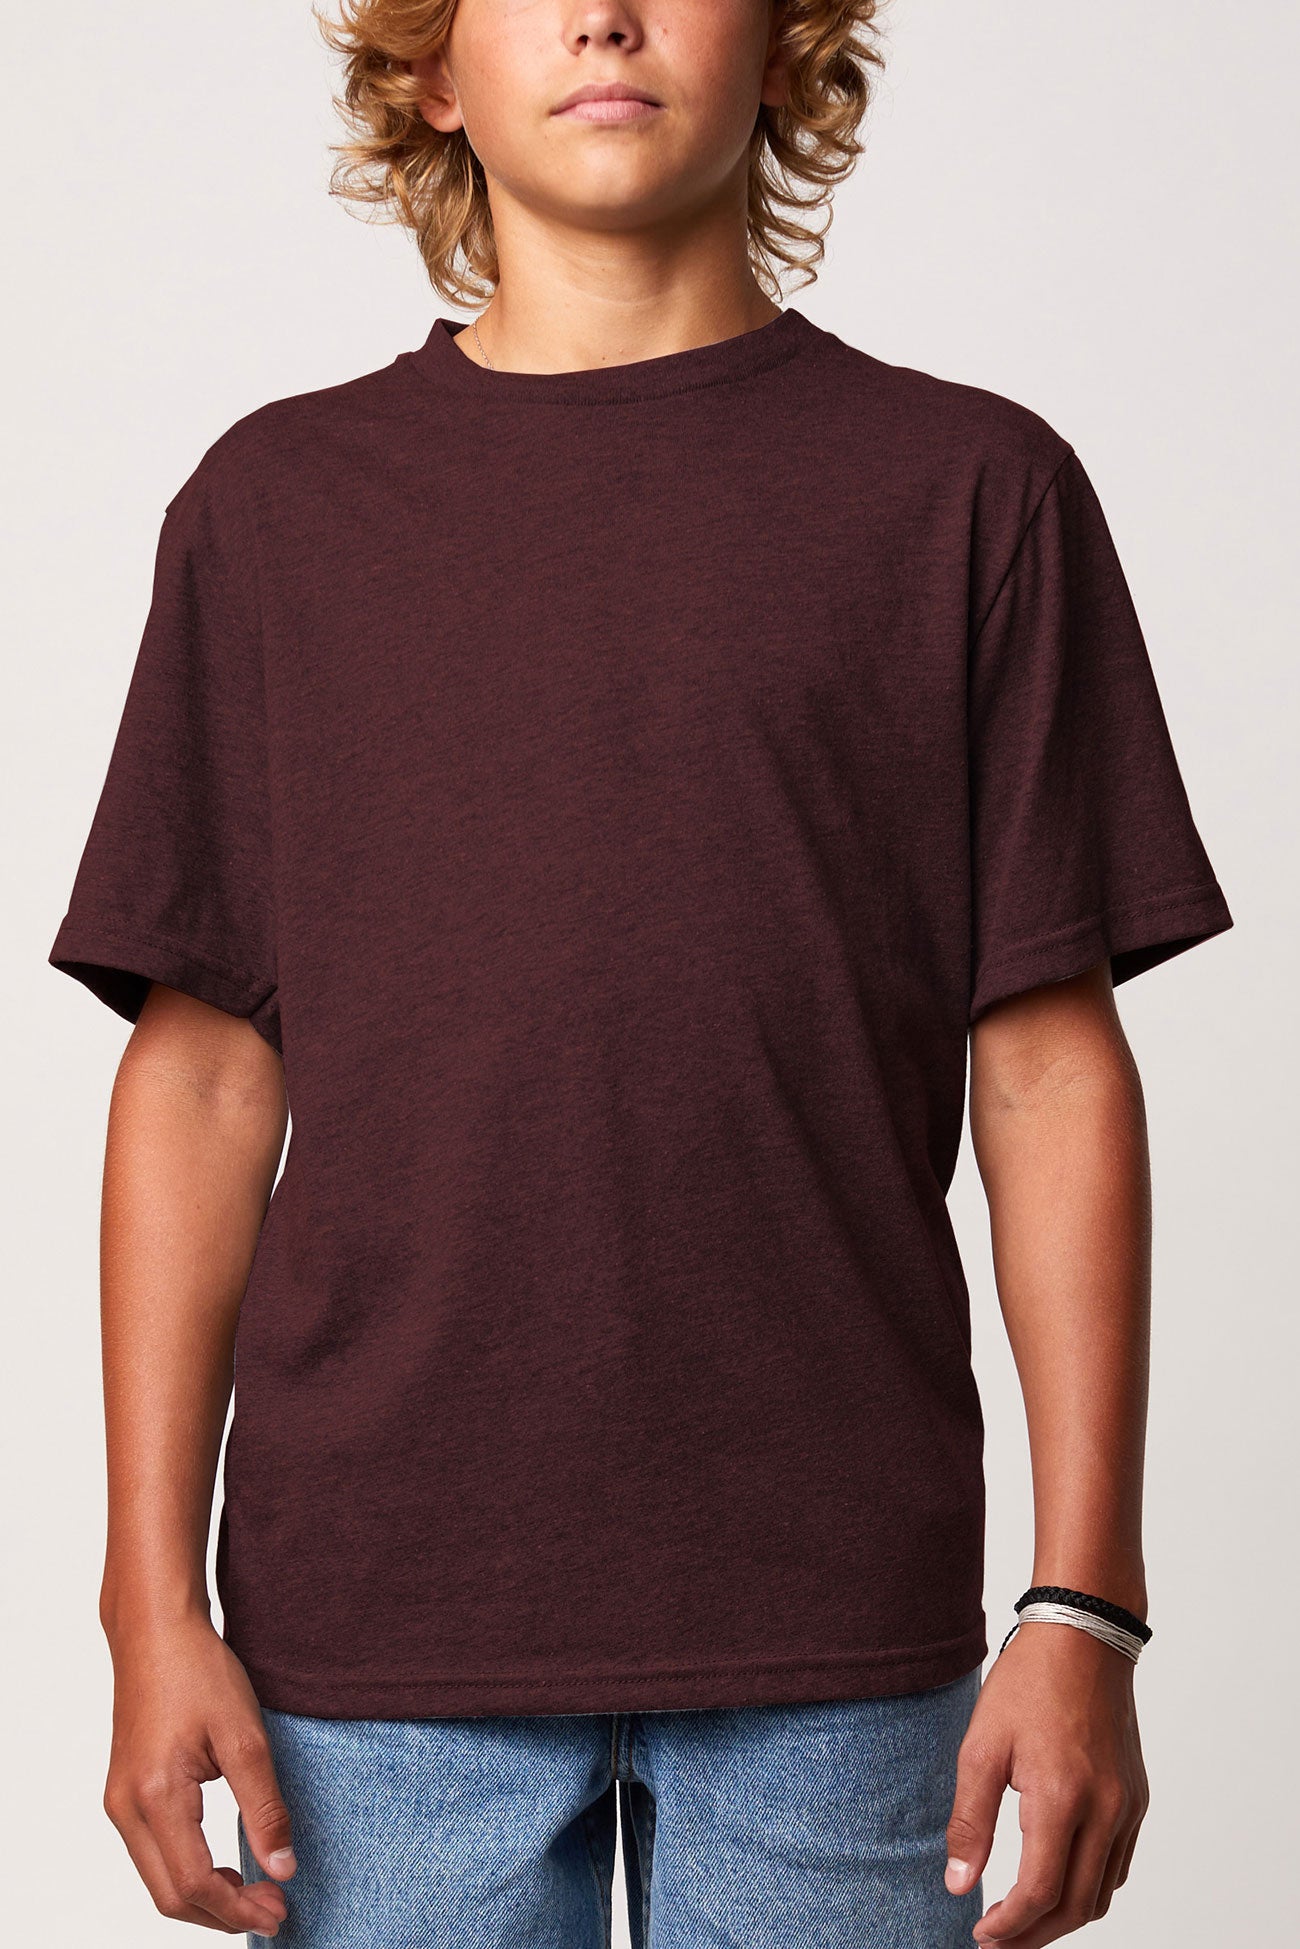 #CY1150SS Prime - Short Sleeve Crew - Youth